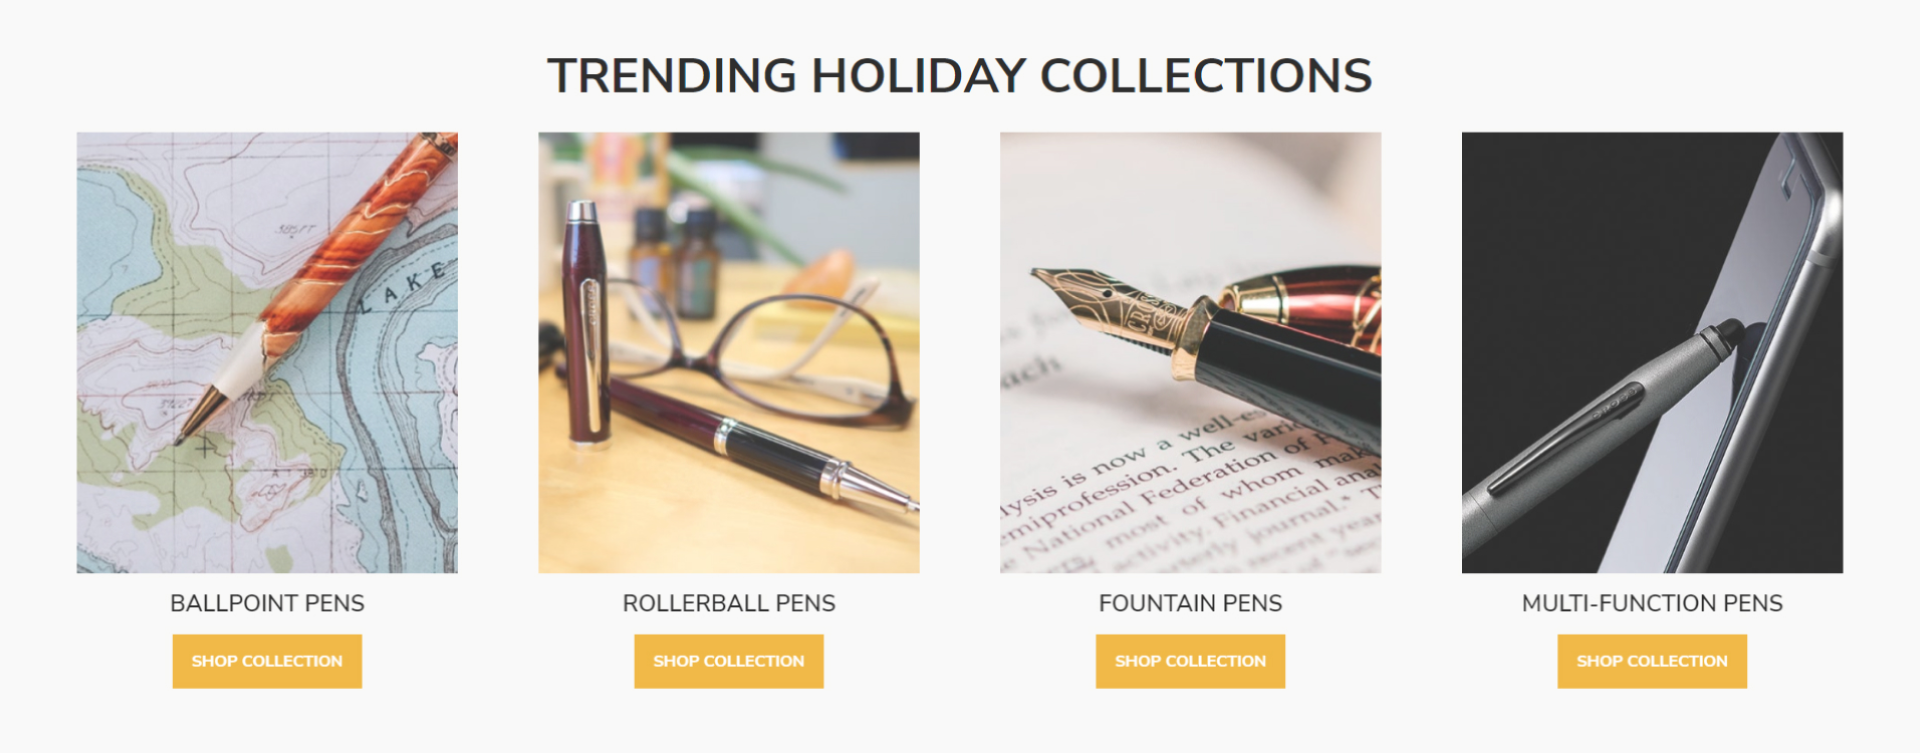 trending-holiday